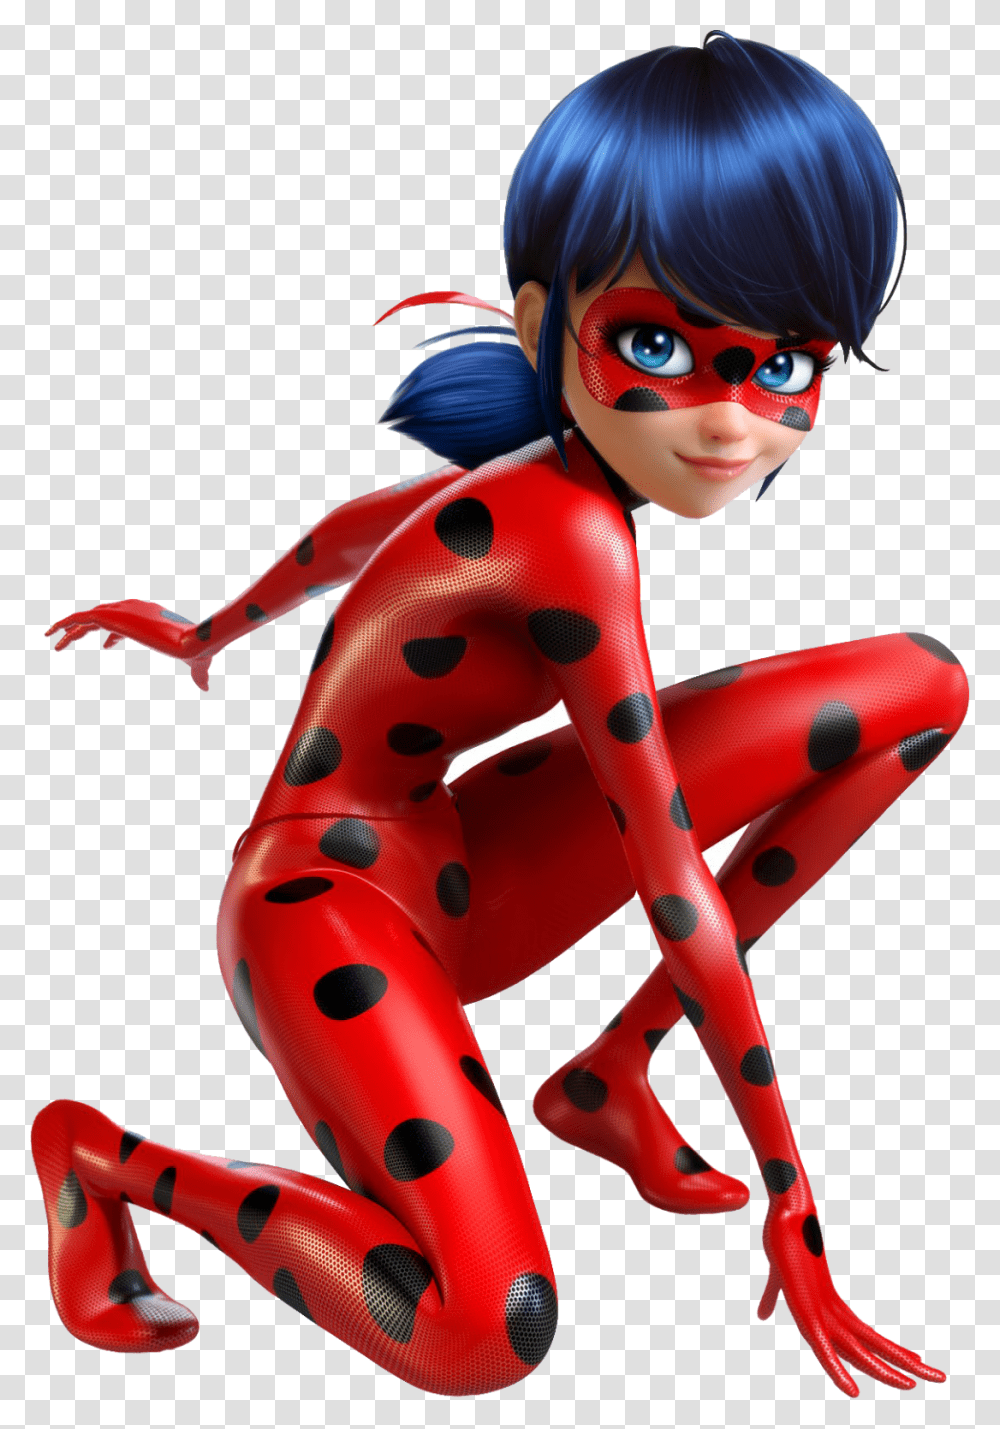 Ladybug Hd Ladybug Hd Images, Sunglasses, Accessories, Accessory, Toy Transparent Png